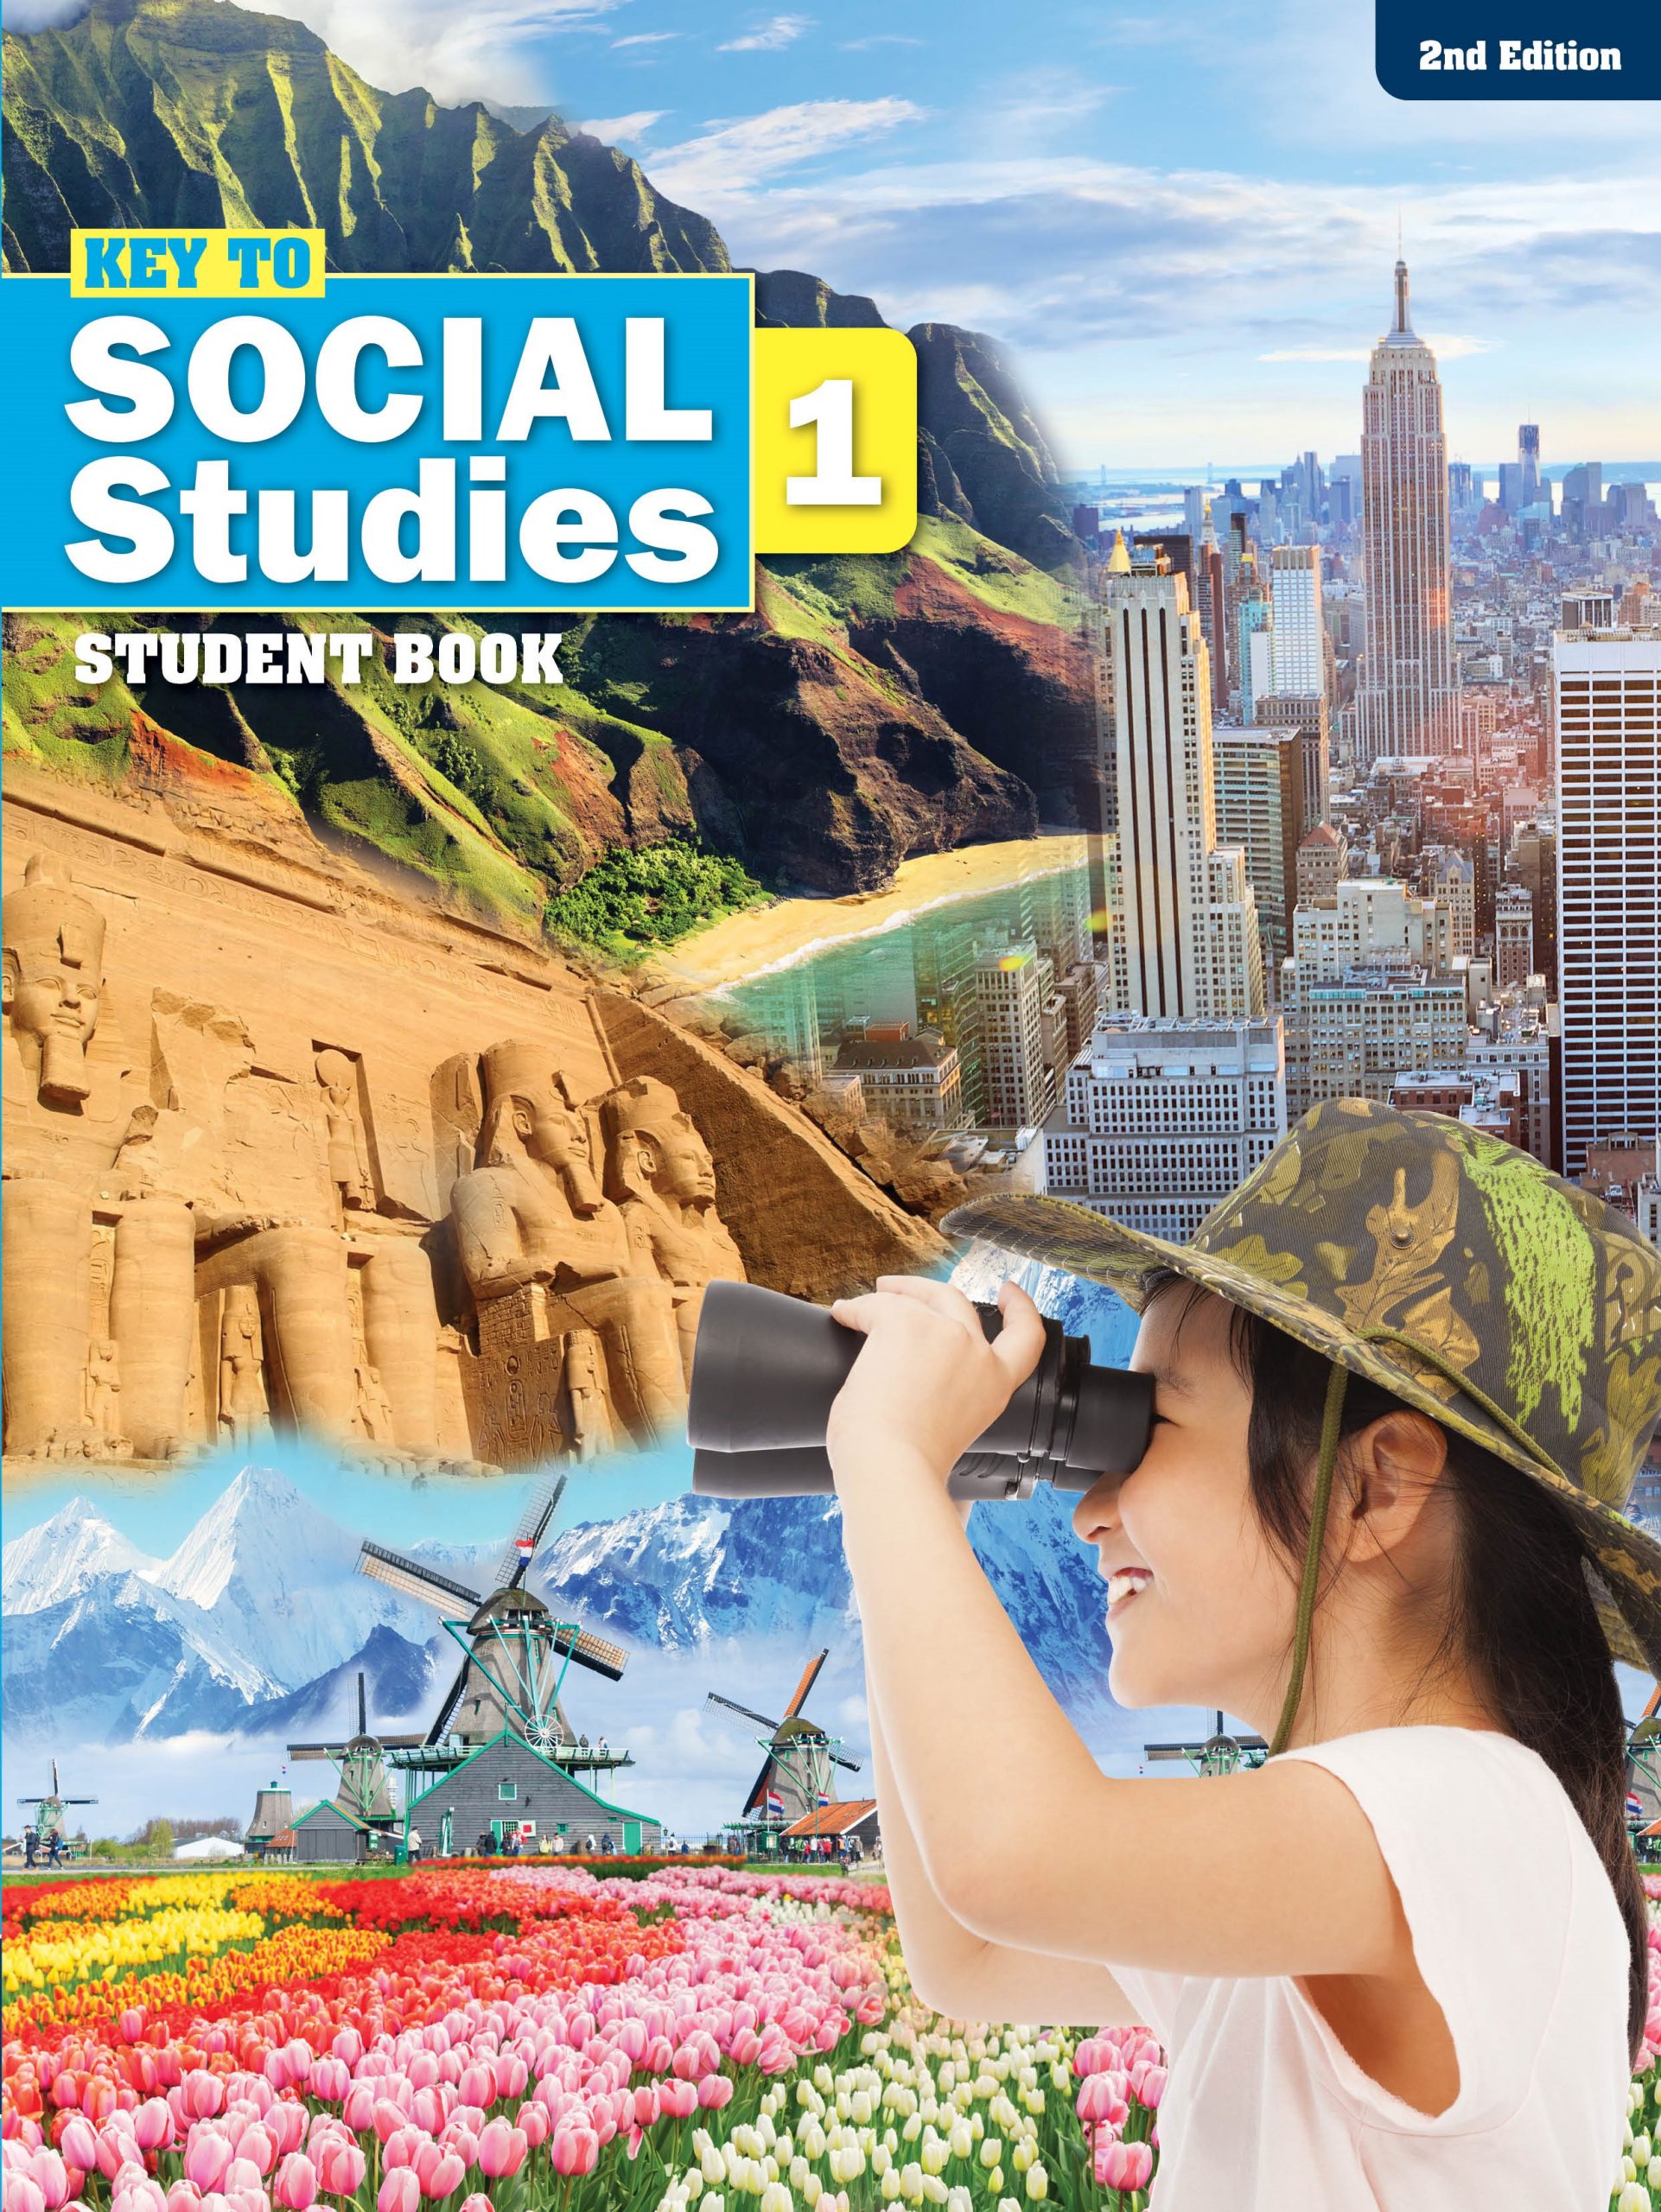 Key to Social Studies Student Book 1 (New Edition)